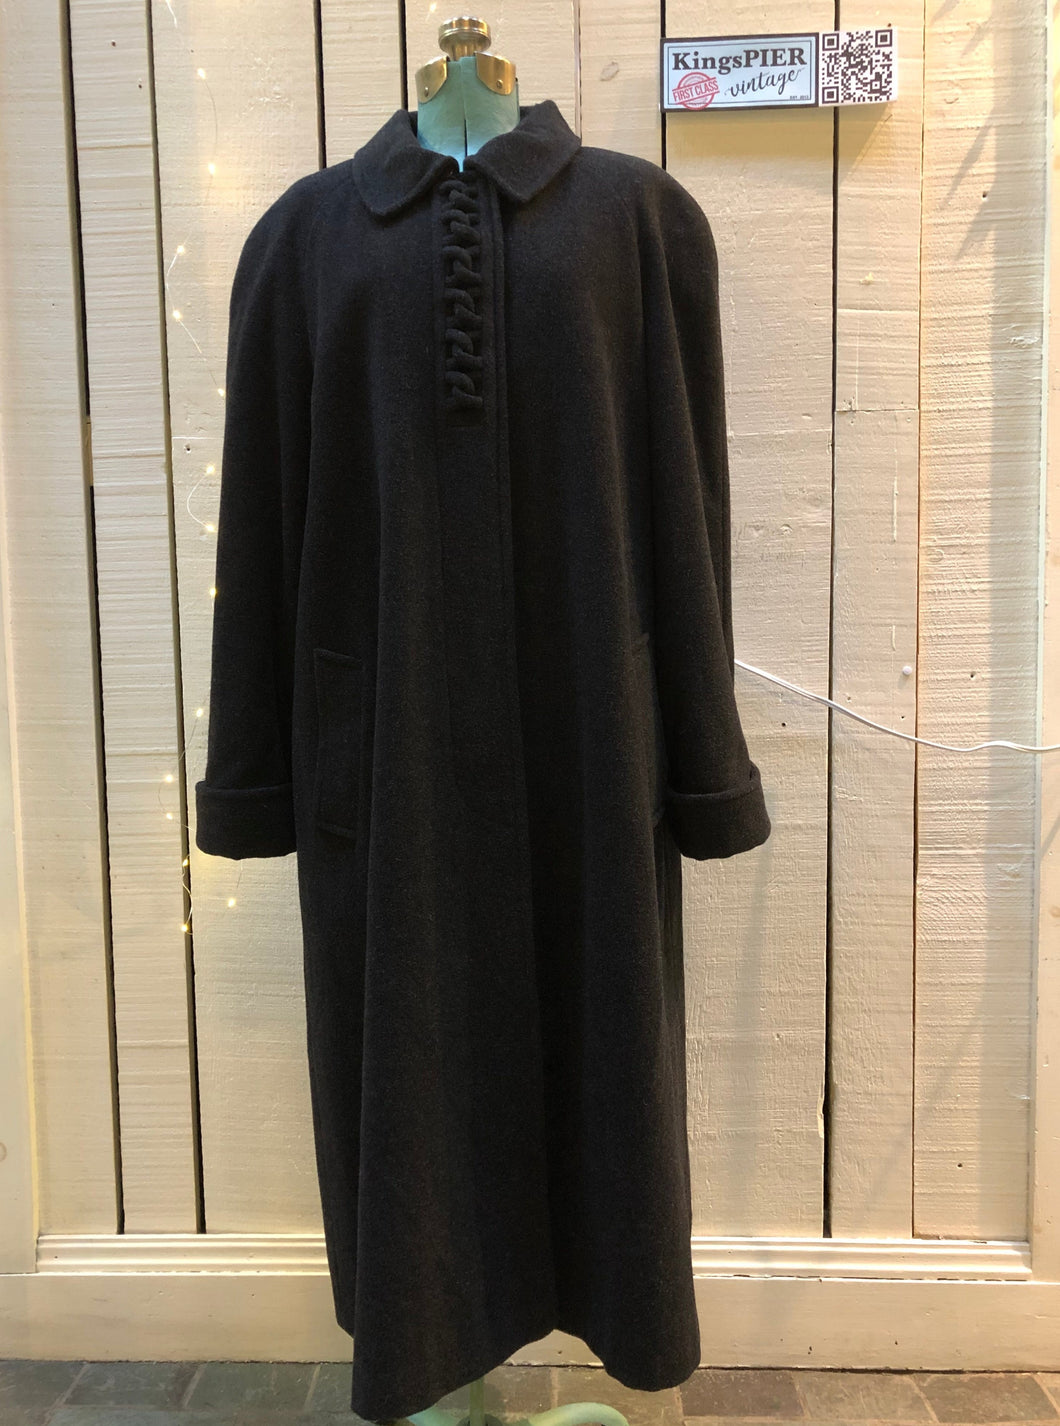 Kingspier Vintage - Vintage Luba limited edition lambswool blend long black coat with woven detail on the front, button closures, two pockets in the front and a satin lining.Made in Romania.Size 16.